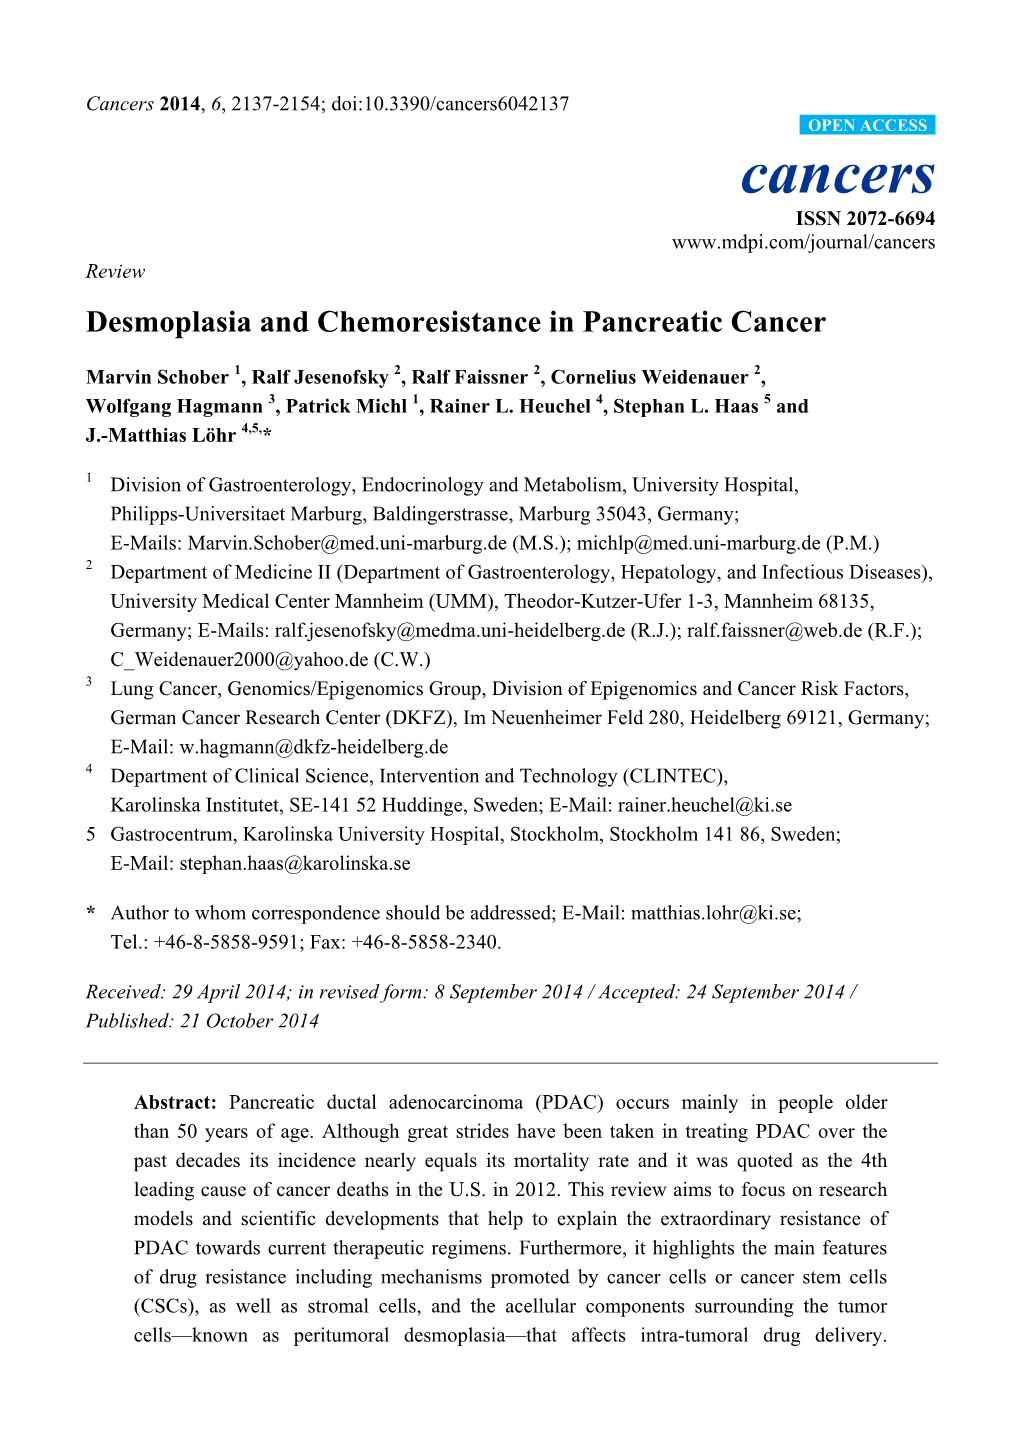 Desmoplasia and Chemoresistance in Pancreatic Cancer